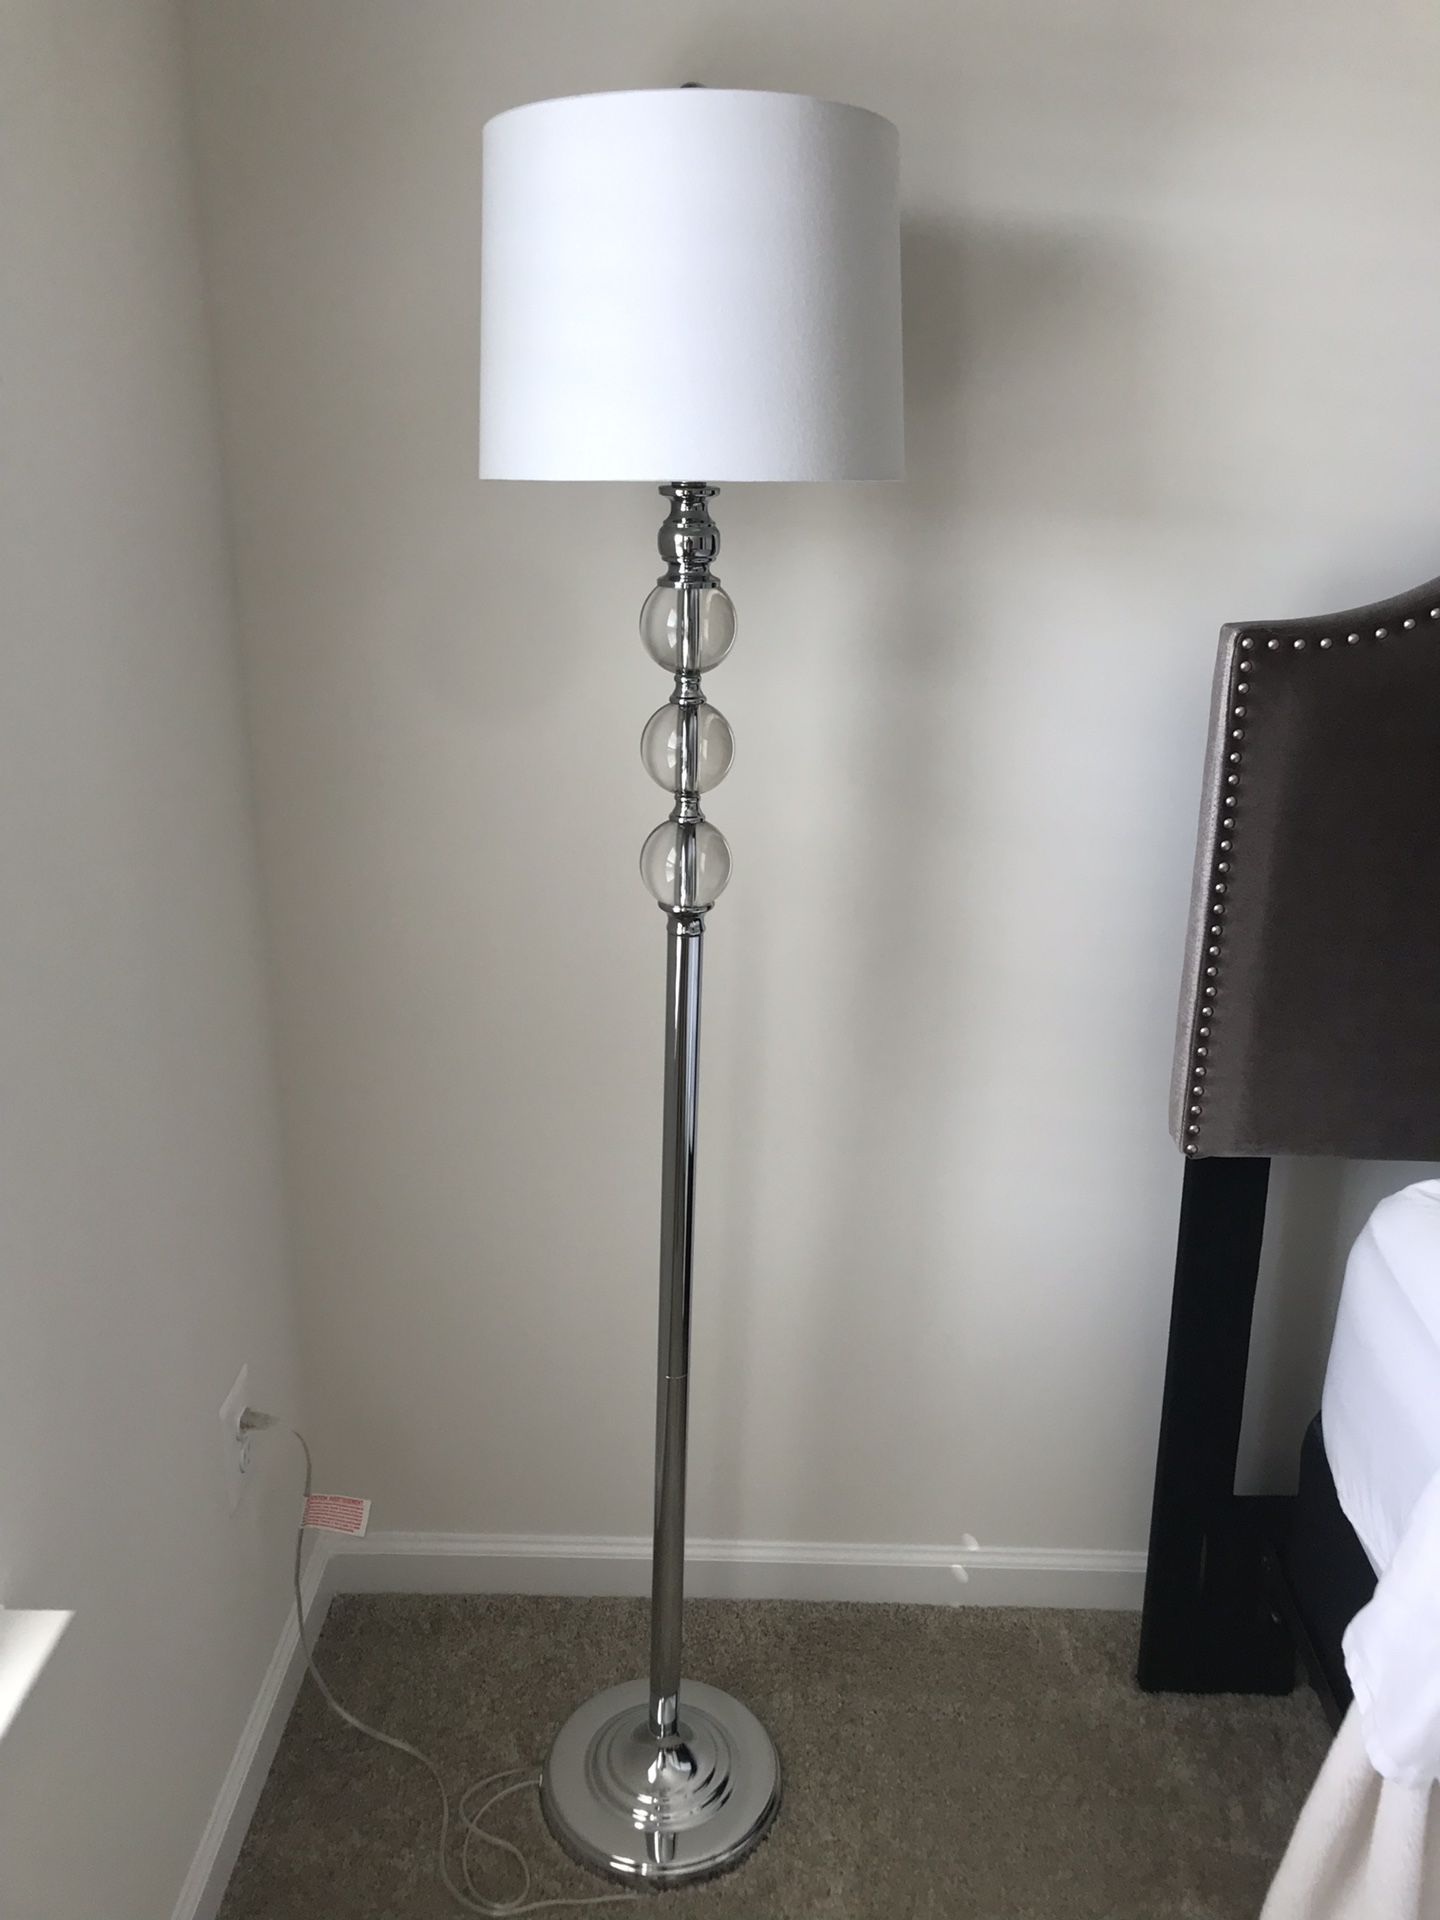 Floor Lamp - Chrome - Like new! Great condition!